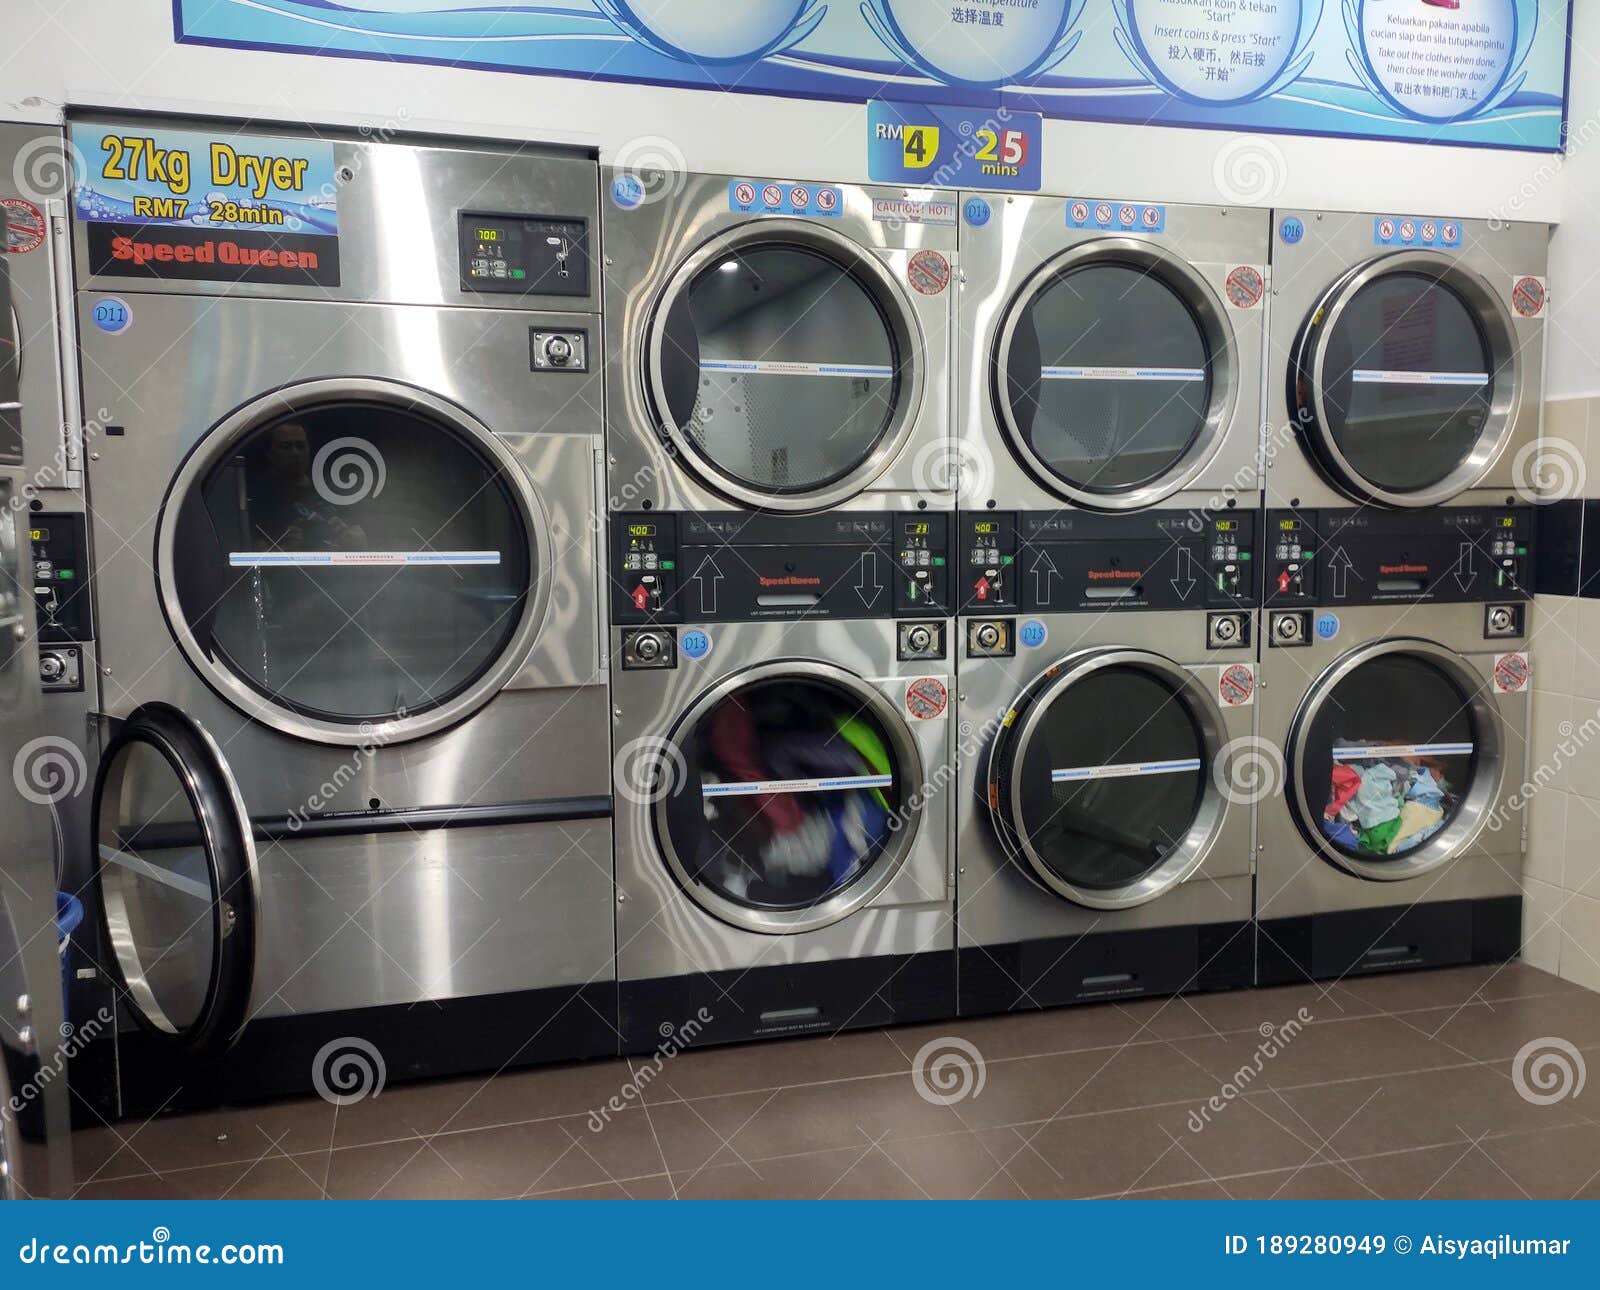 laundry-machines-outlet-provides-self-service-laundry-drying-machines-open-hours-kuala-lumpur-malaysia-march-laundry-189280949.jpg